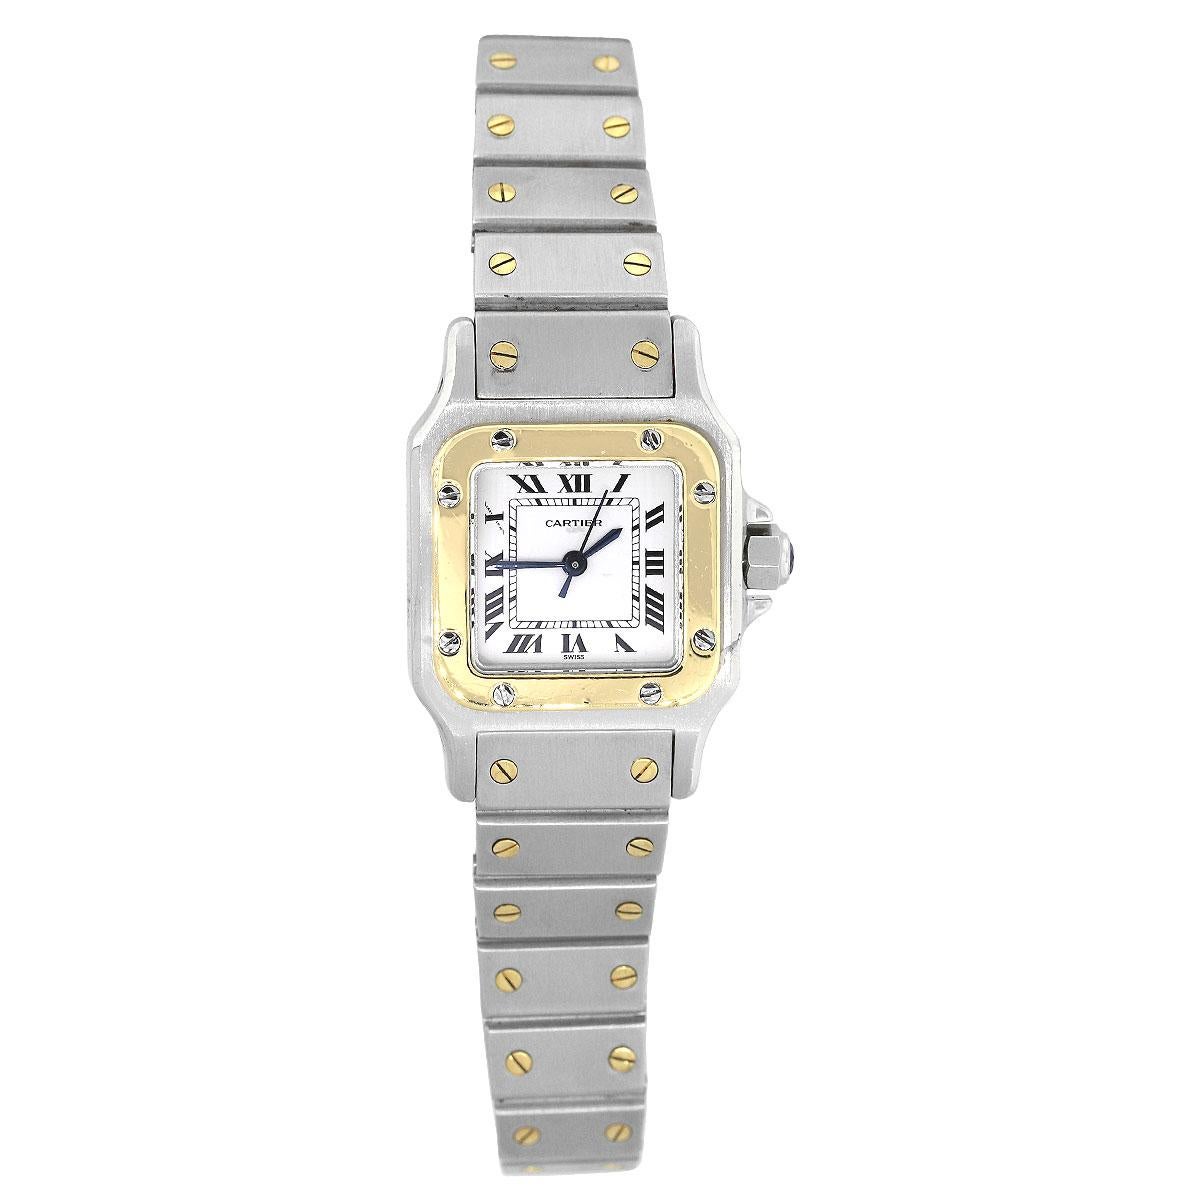 Brand: Cartier
Model: Santos Galbee
Case Material: Stainless steel
Case Diameter: 24mm
Crystal: Sapphire crystal
Bezel: Smooth 18k yellow gold bezel with stainless steel Cartier screws
Dial: White dial with black roman numerals. Blue hour and minute